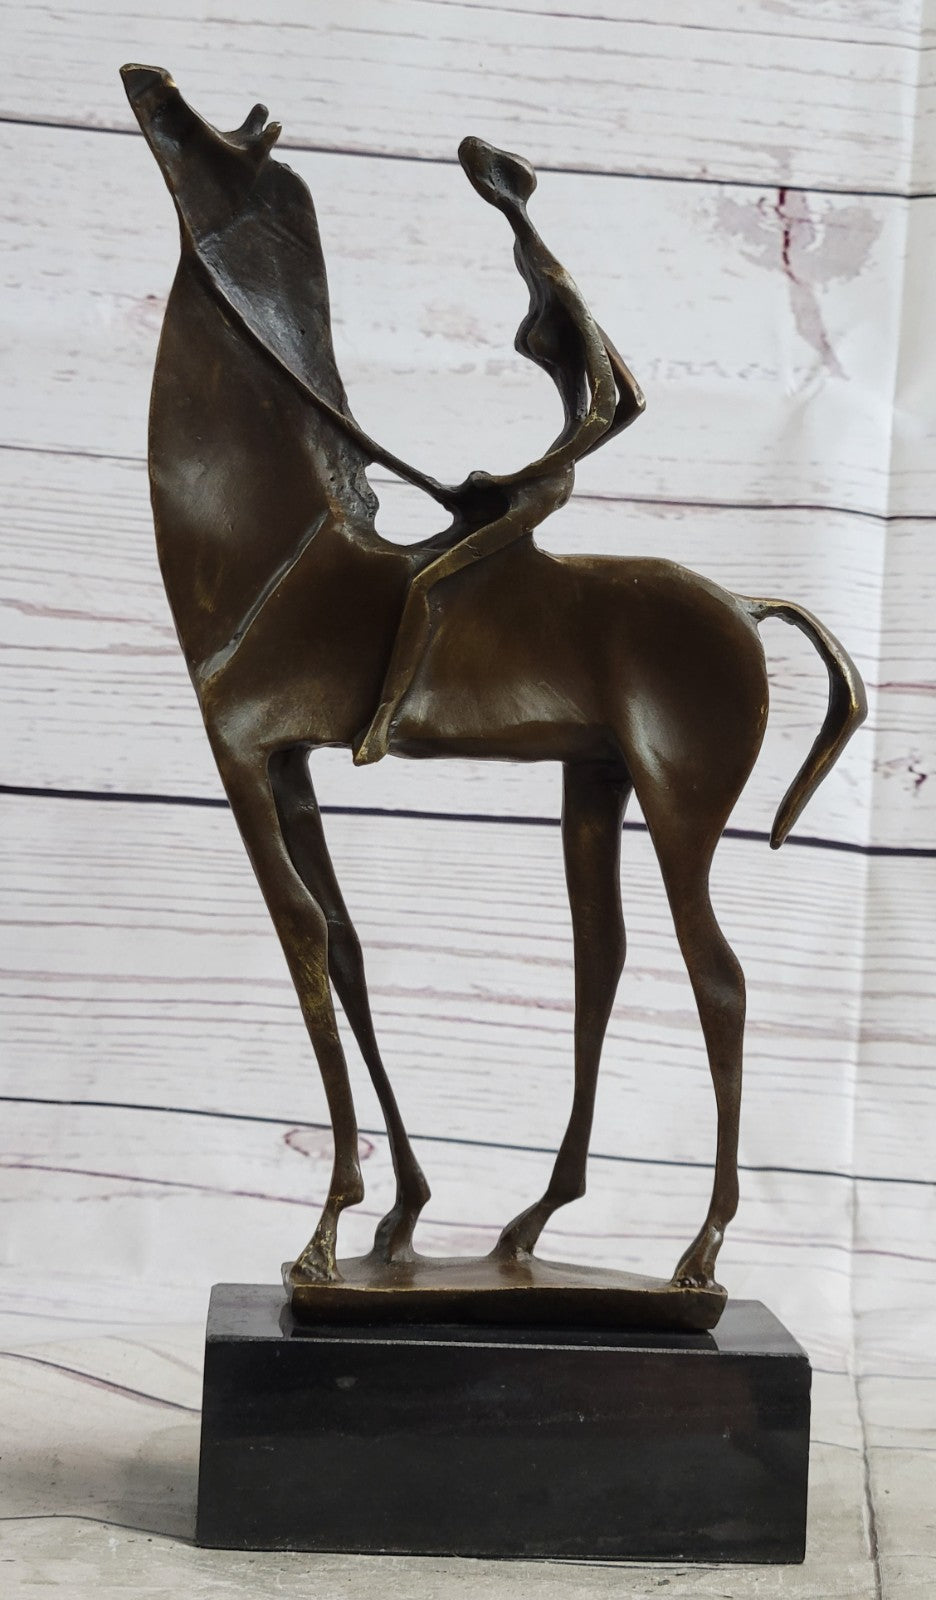 Abstract Animal Bronze Sculpture "Horse" Homage to Salvador Dali signed Figurine